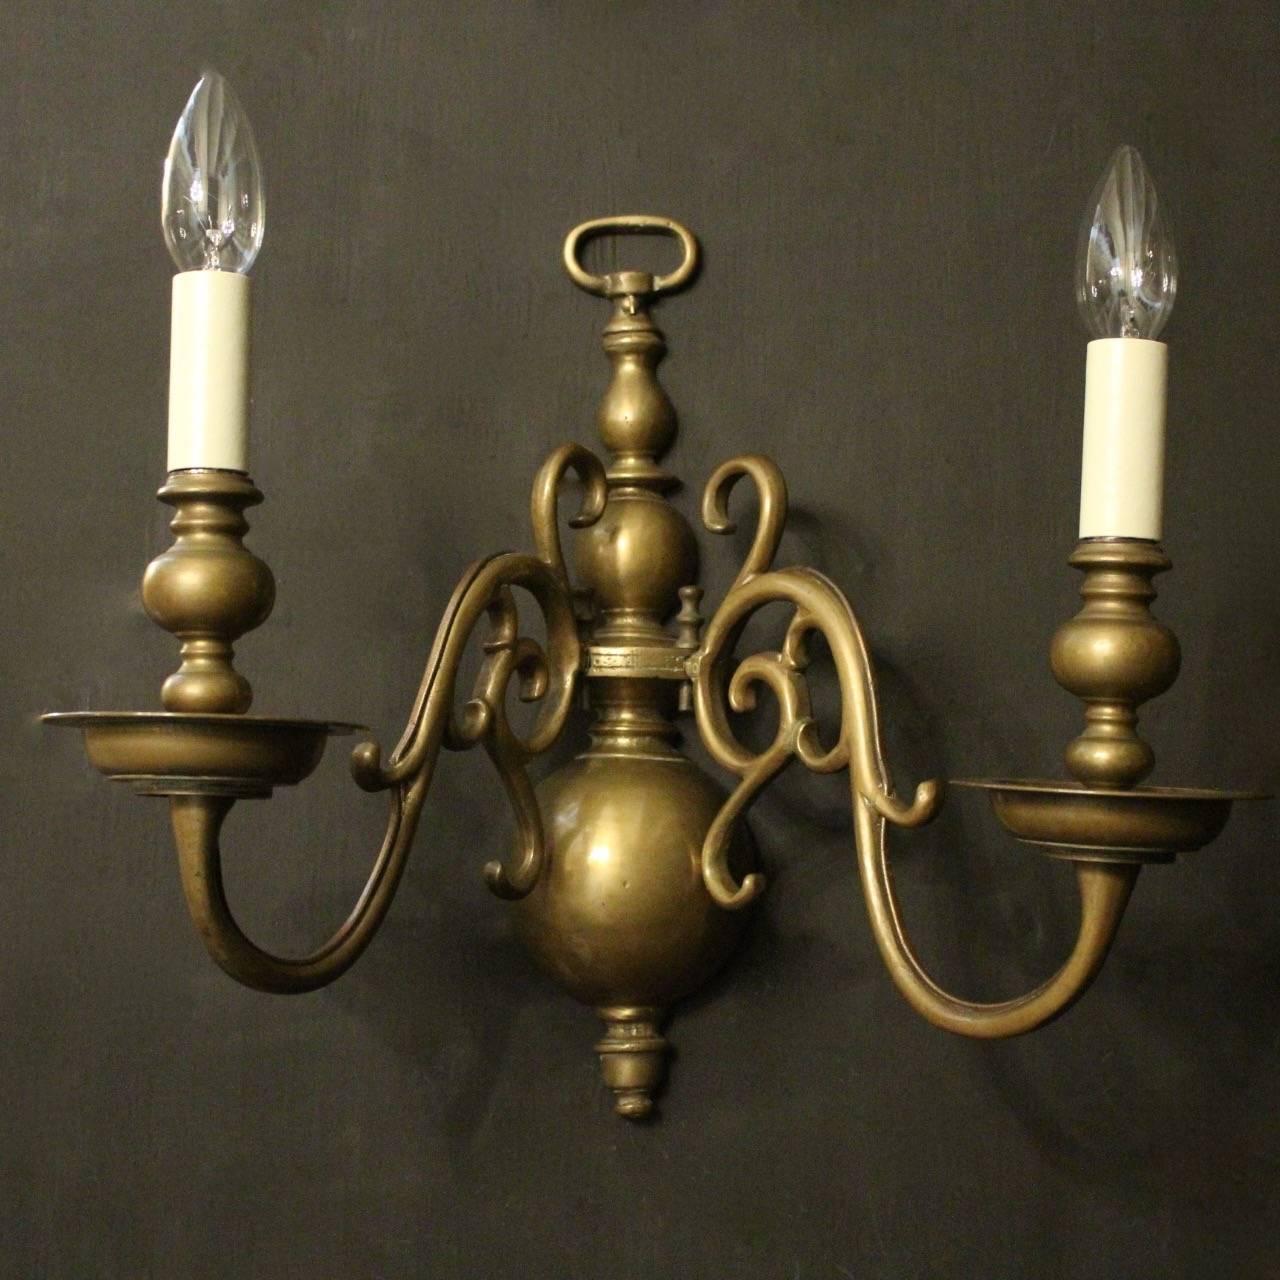 A Flemish set of four bronze twin-arm antique wall sconces, the scrolling arms with circular cast bobeche drip pans and bulbous candle sconces, issuing from a large elongated baluster knopped backplate, nice original faded oxidised patination and